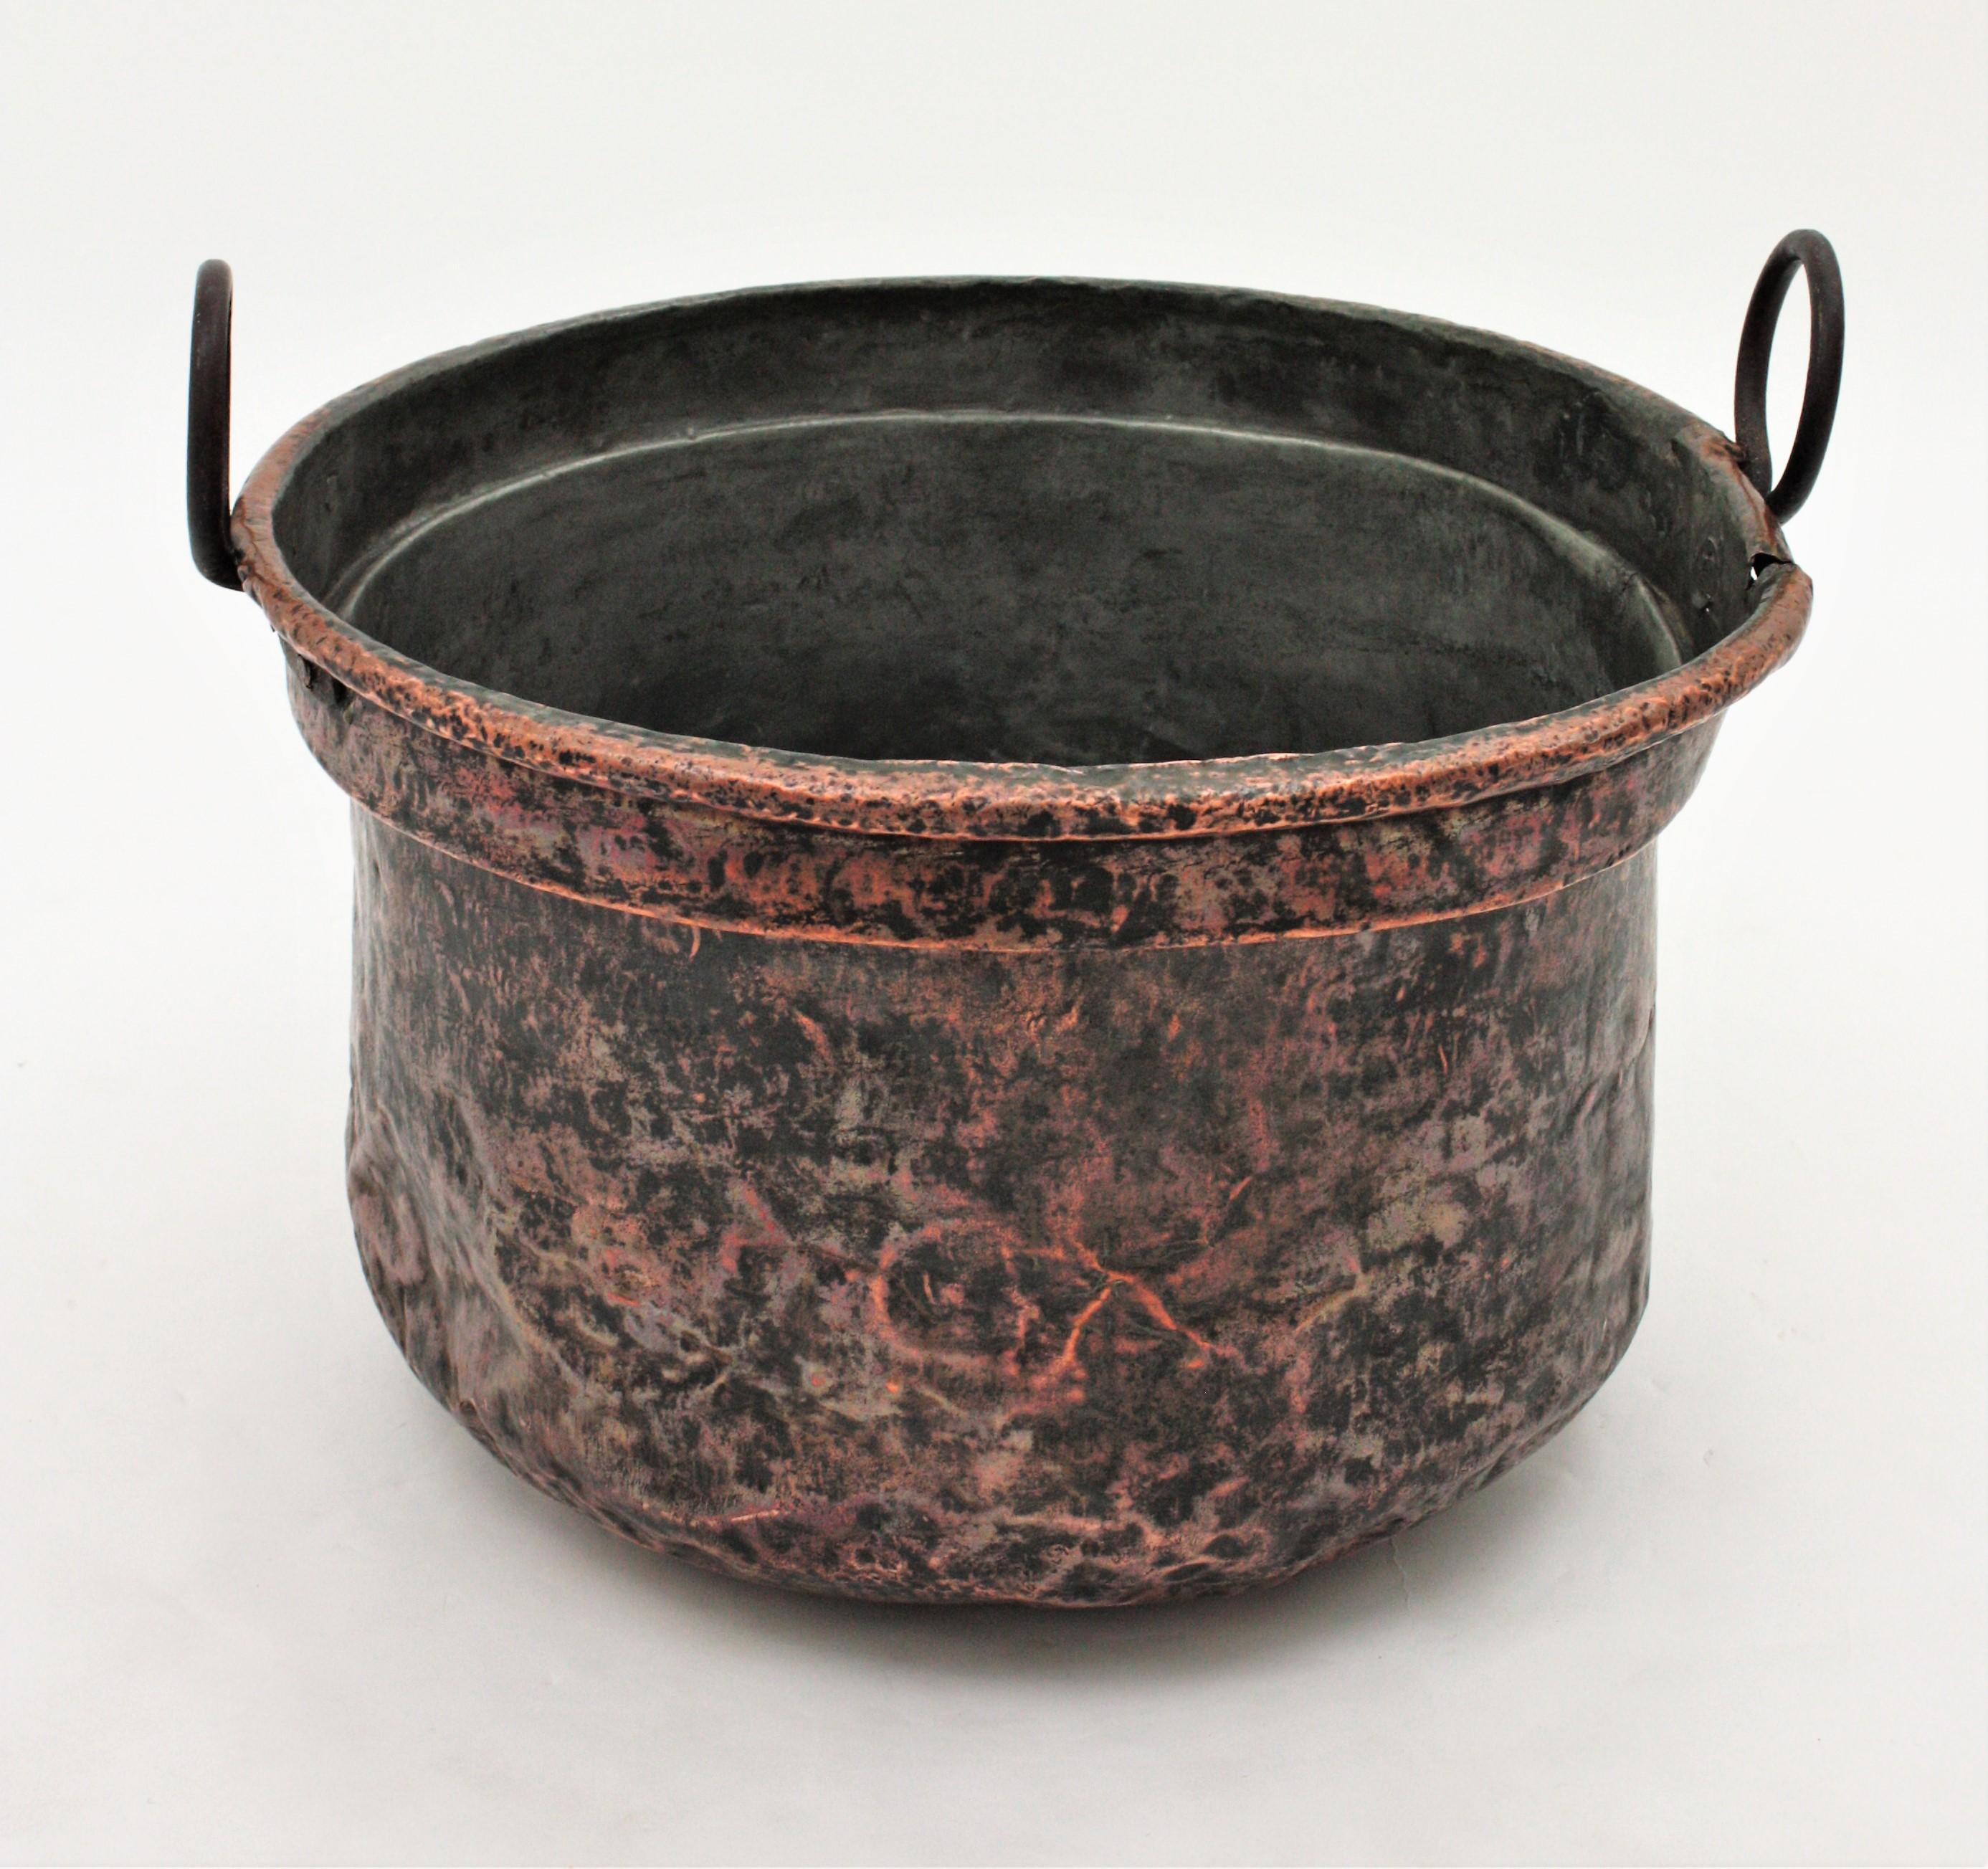 Massive 19th Century French Copper Cauldron with Handles and Terrific Patina 2